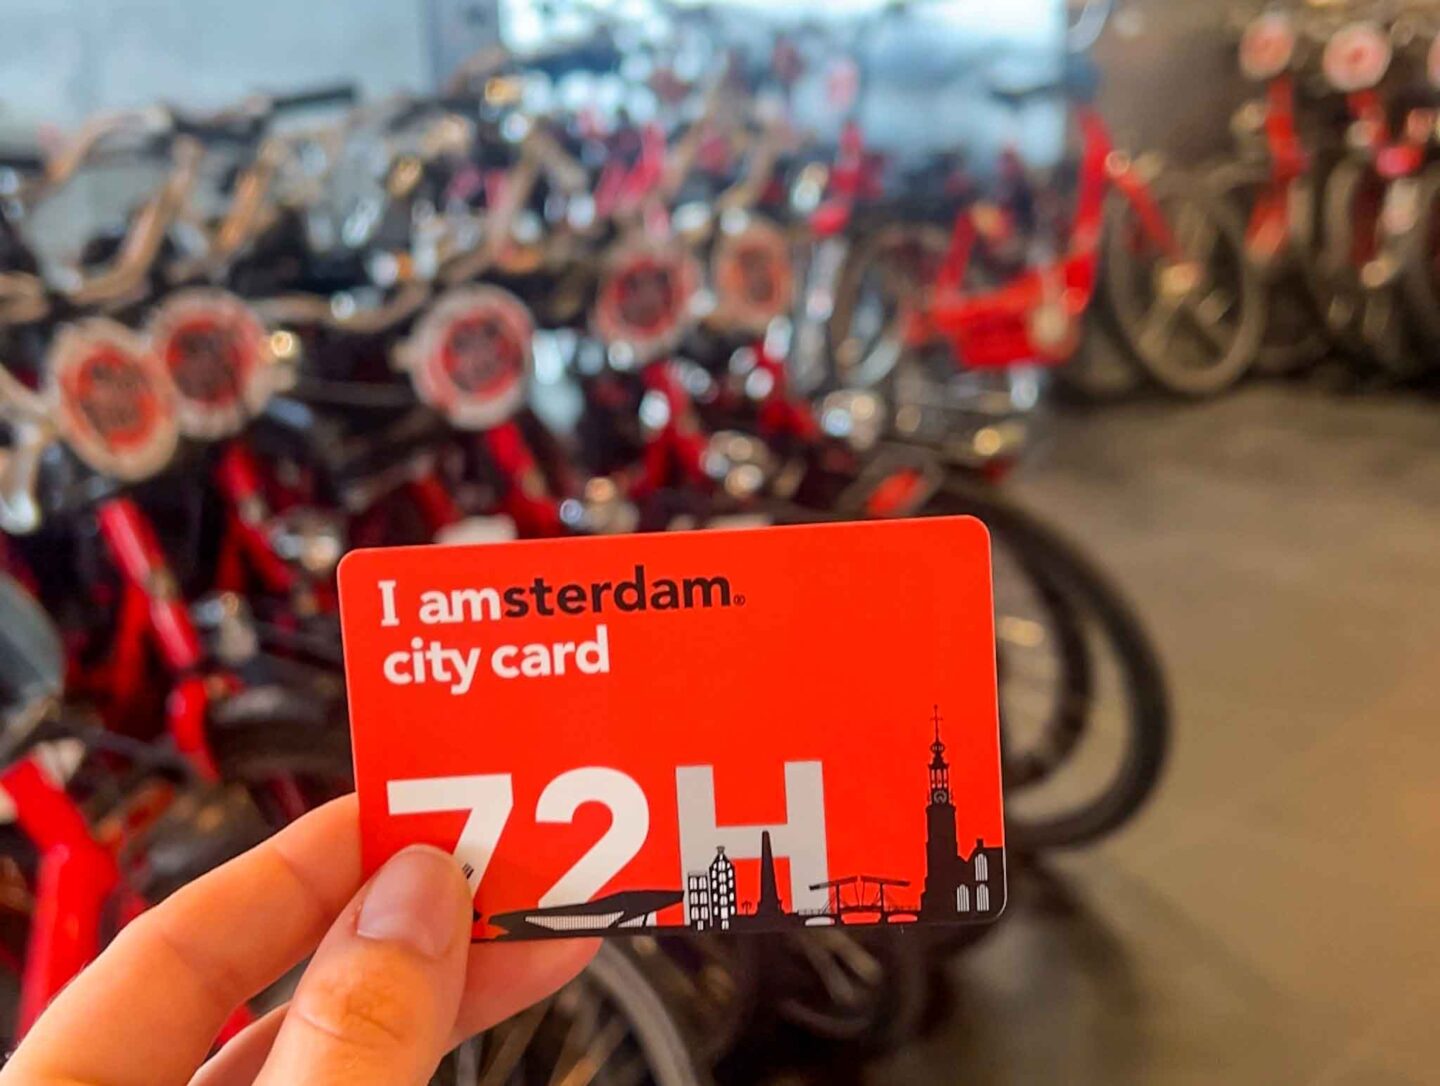 Things to do in Amsterdam Noord, I Amsterdam City Card by bike hire